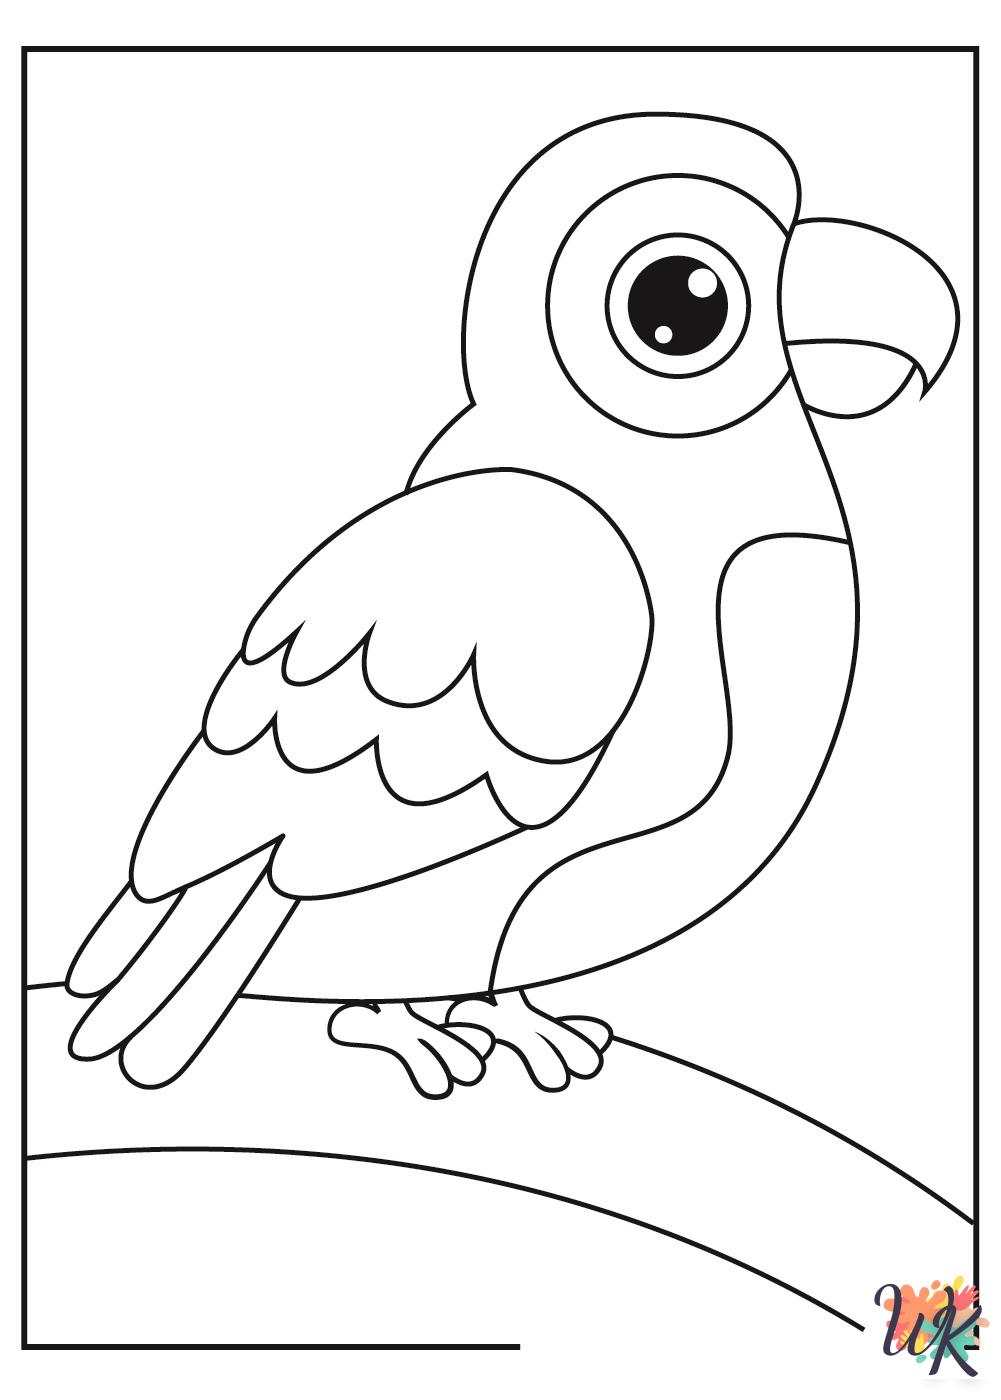 detailed Parrot coloring pages for adults